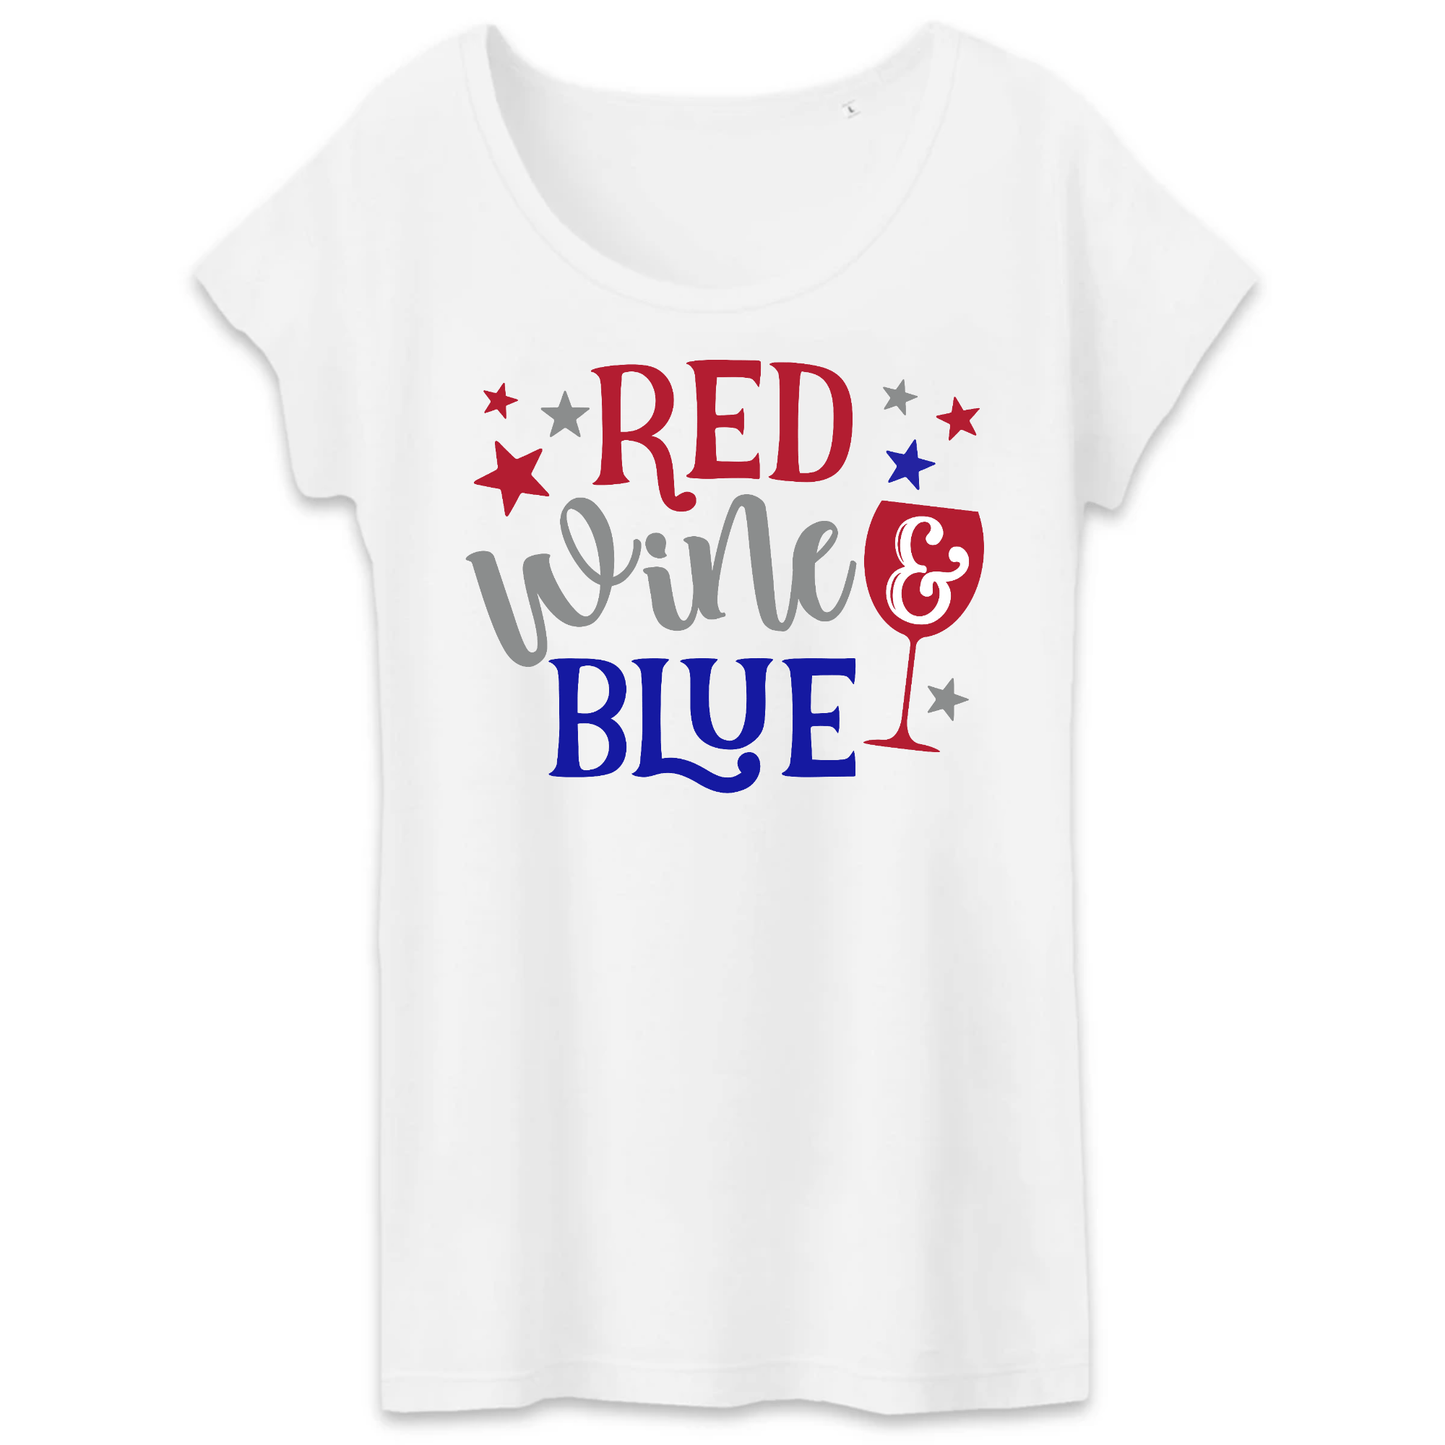 Red, Wine and Blue Women's T-Shirt - 100% Organic Cotton - Premium T-shirt Femme BandC - TW043 - DTG - Shop now at San Rocco Italia